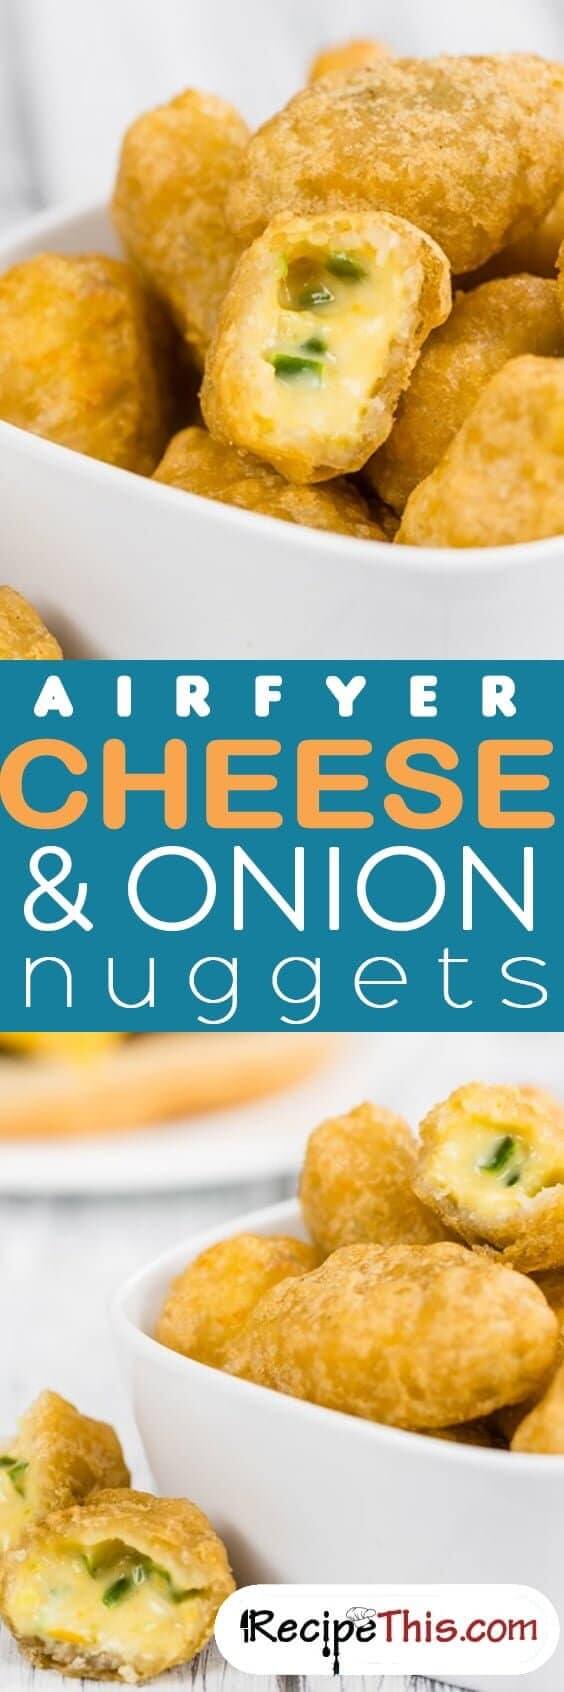 Airfryer Cheese & Onion Nuggets